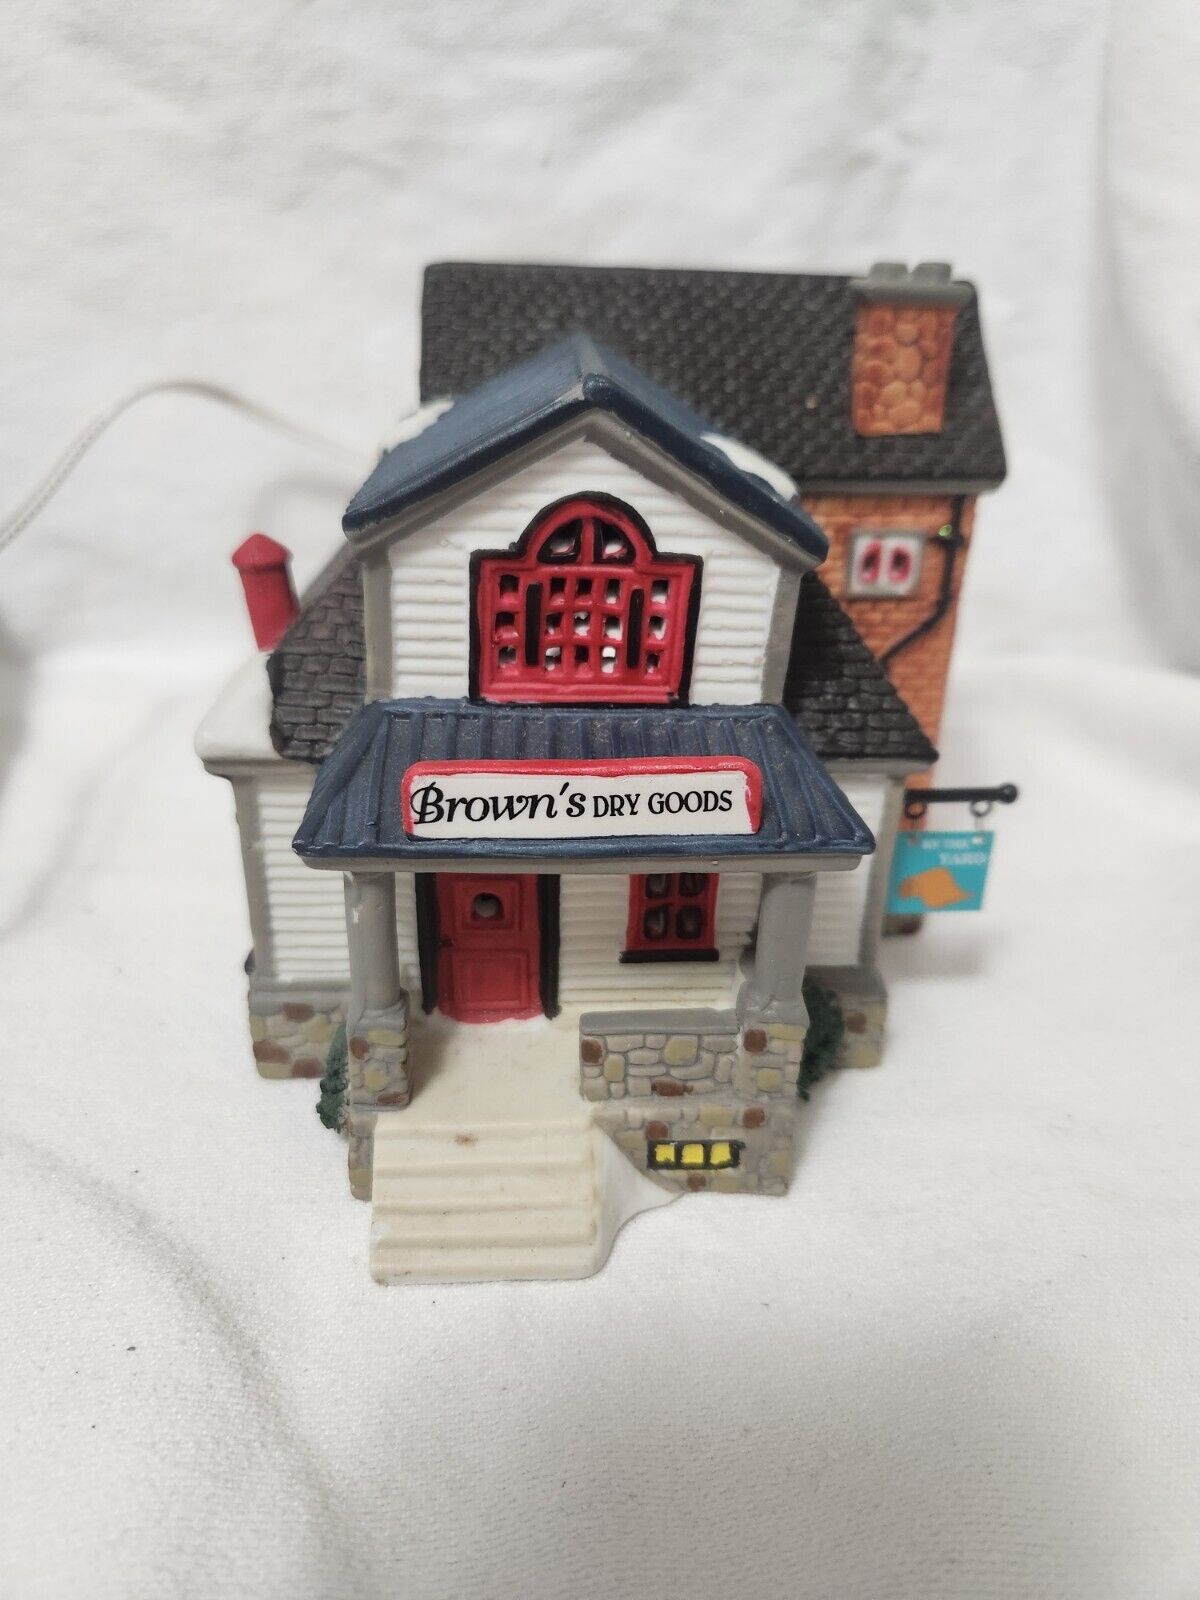 Lemax Dickensvale Briwn's Dry Goods Lighted House 1997 Christmas Village